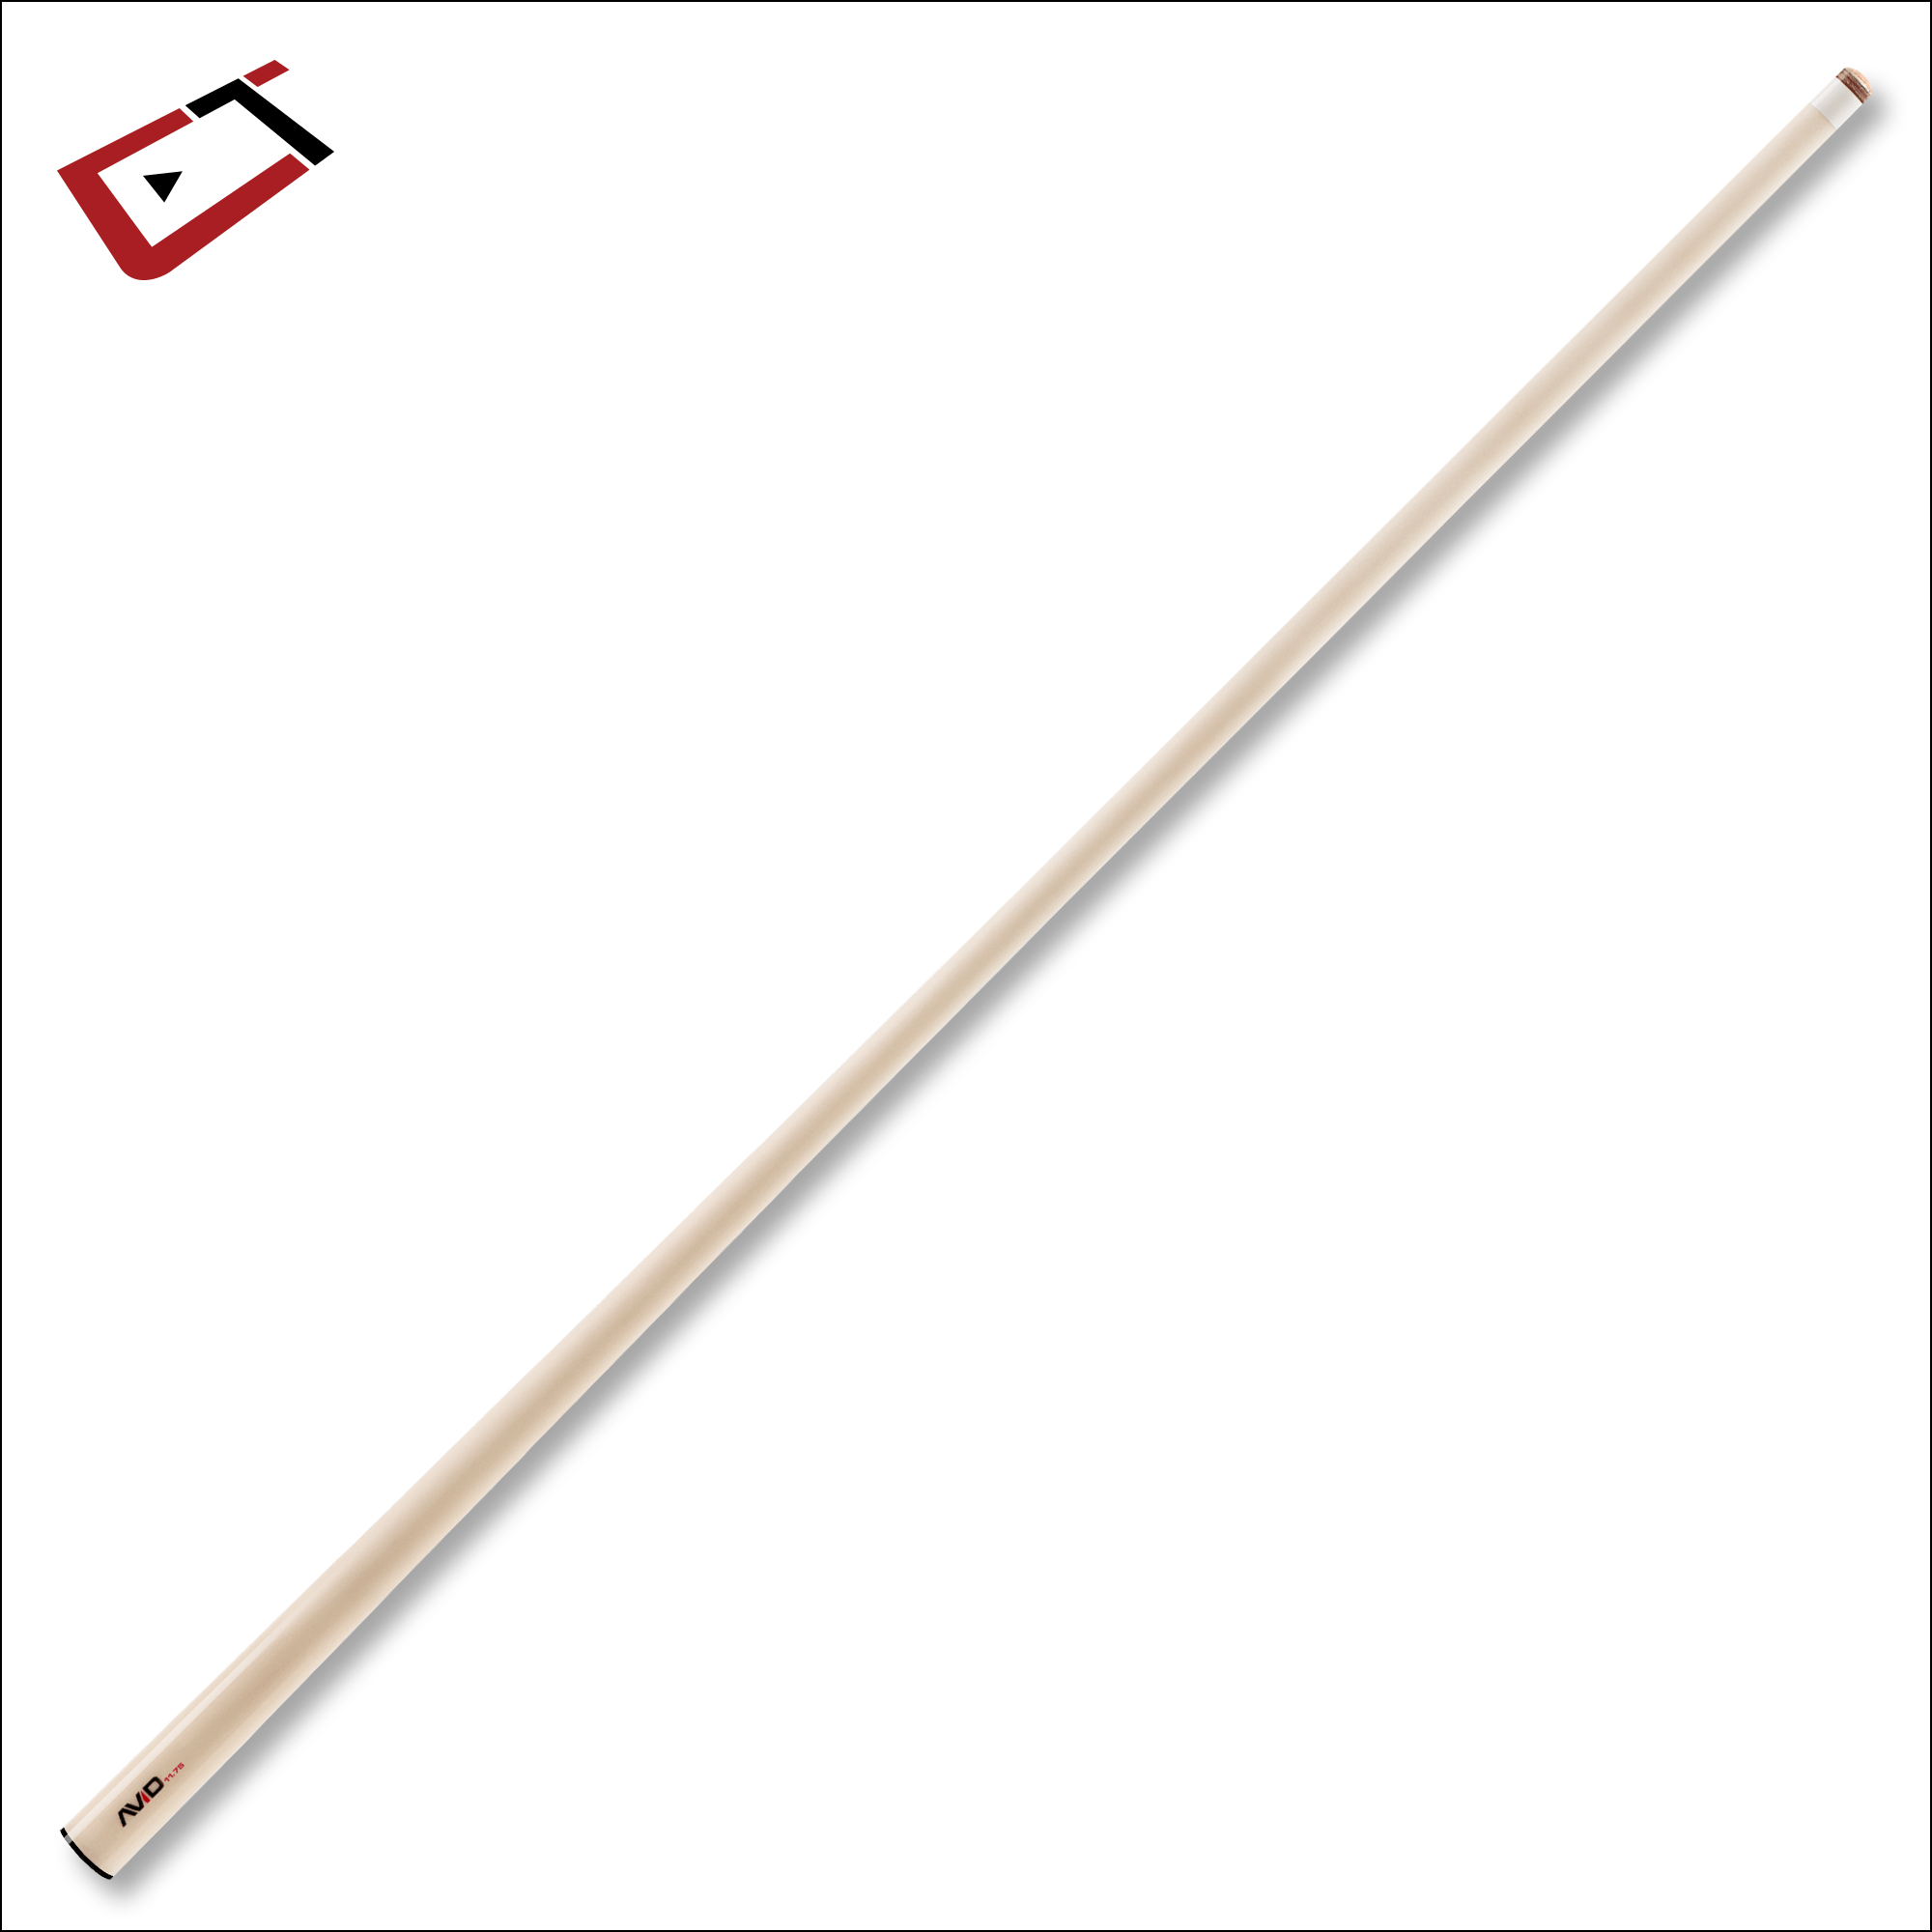 Imperial Pool Cue Imperial - AVID Chroma Sage Cue (11.75 Shaft) - 95-393NW-S